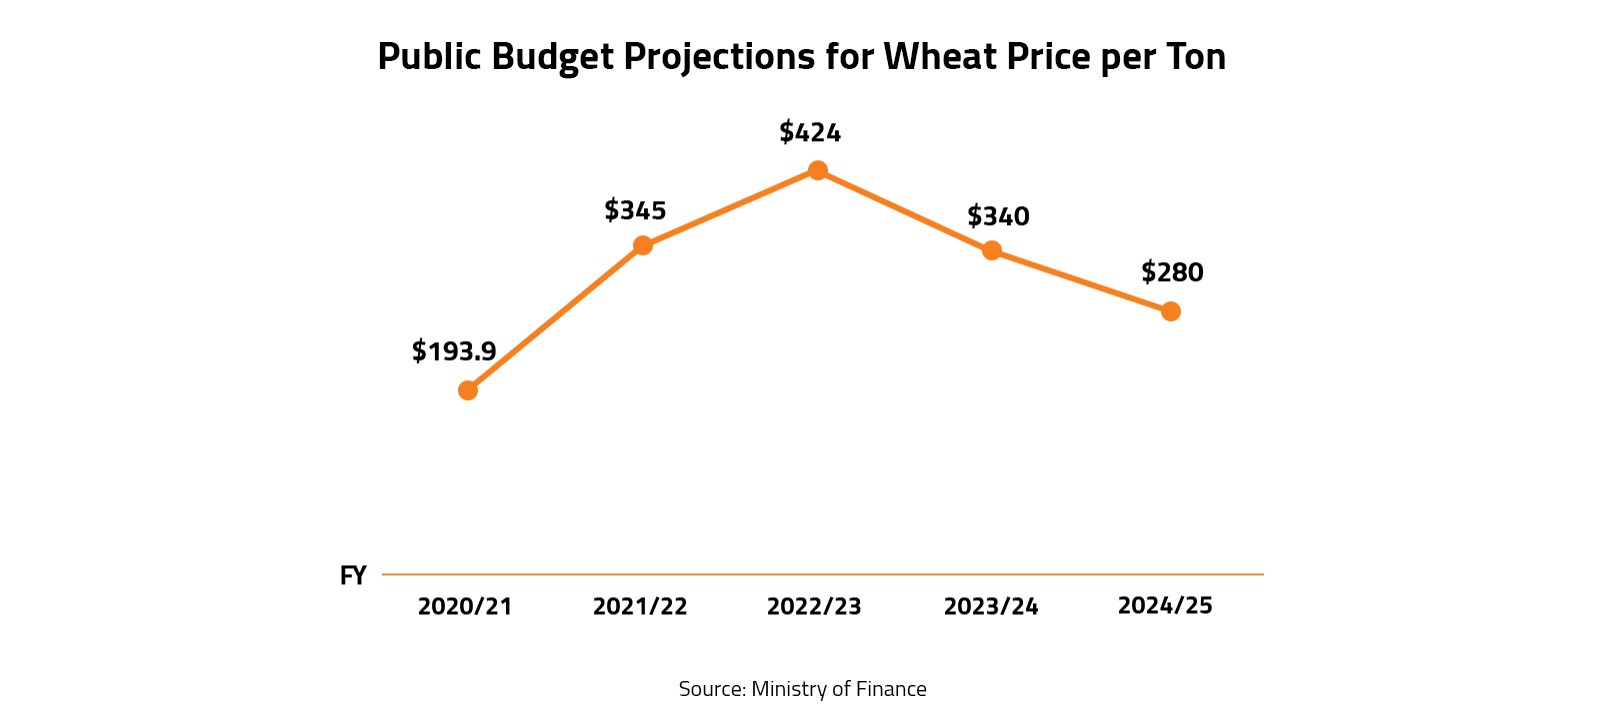 Public Budget Projections for Wheat Price per Ton